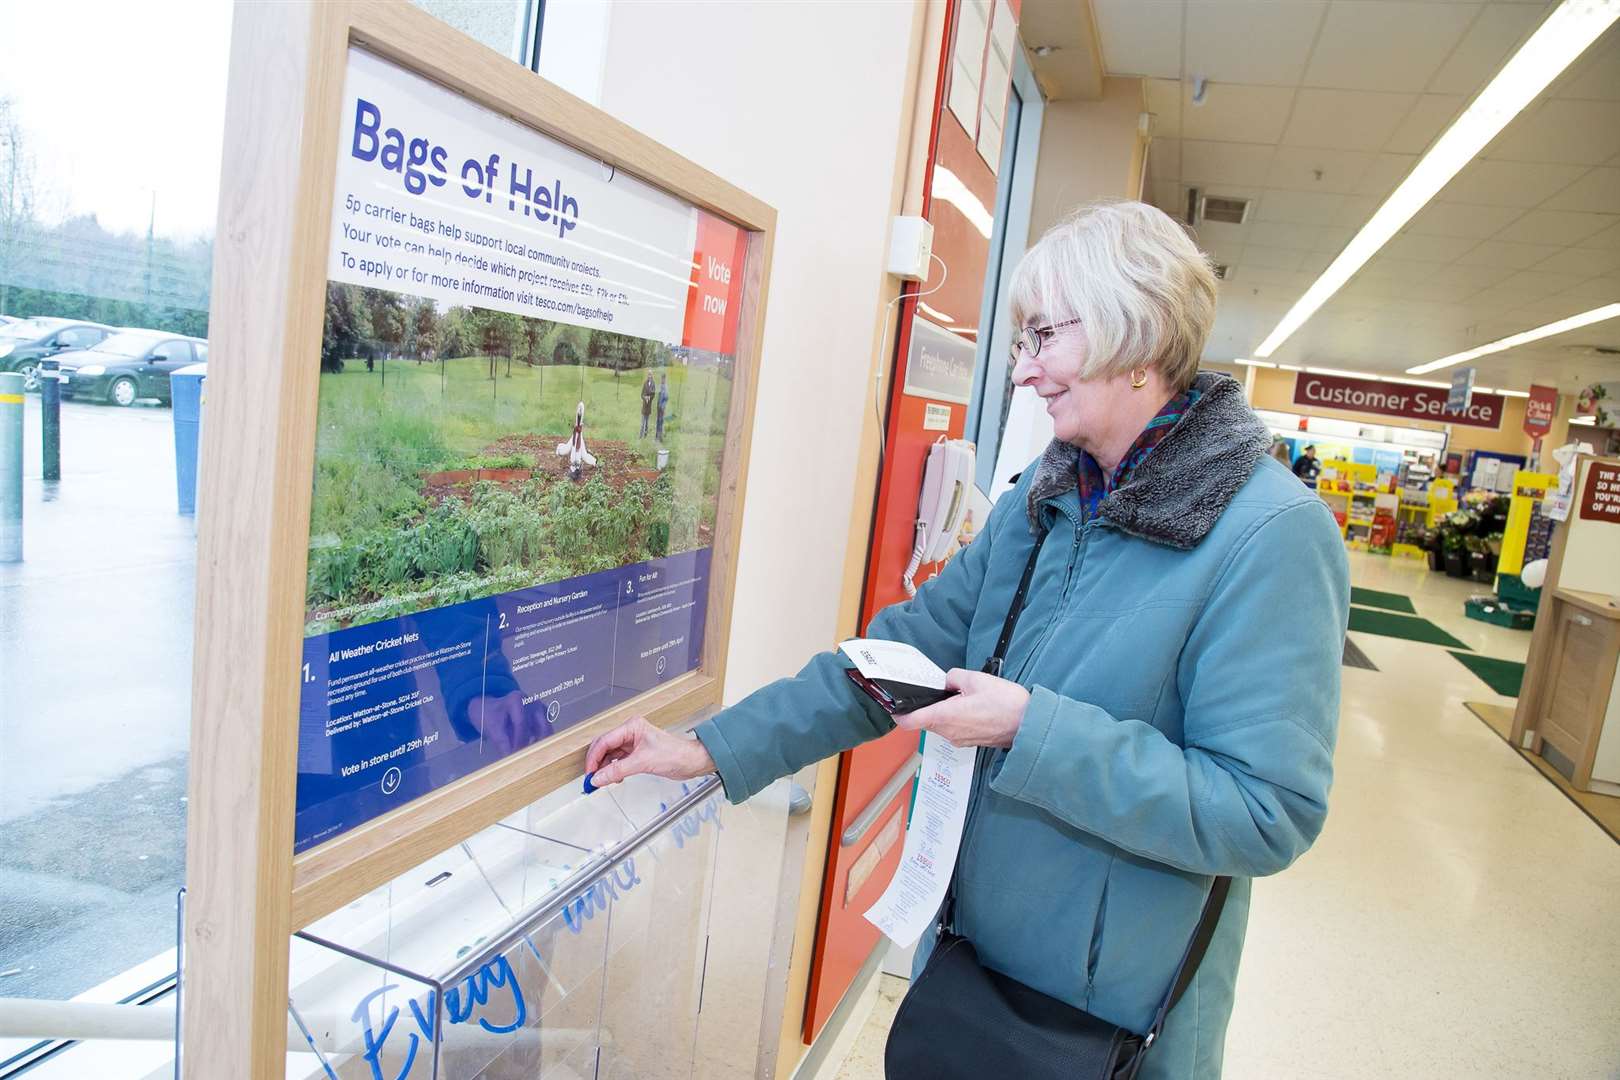 Tesco customers cast votes in store to award Bags of Help funding to local groups. Picture: Kevin Lines